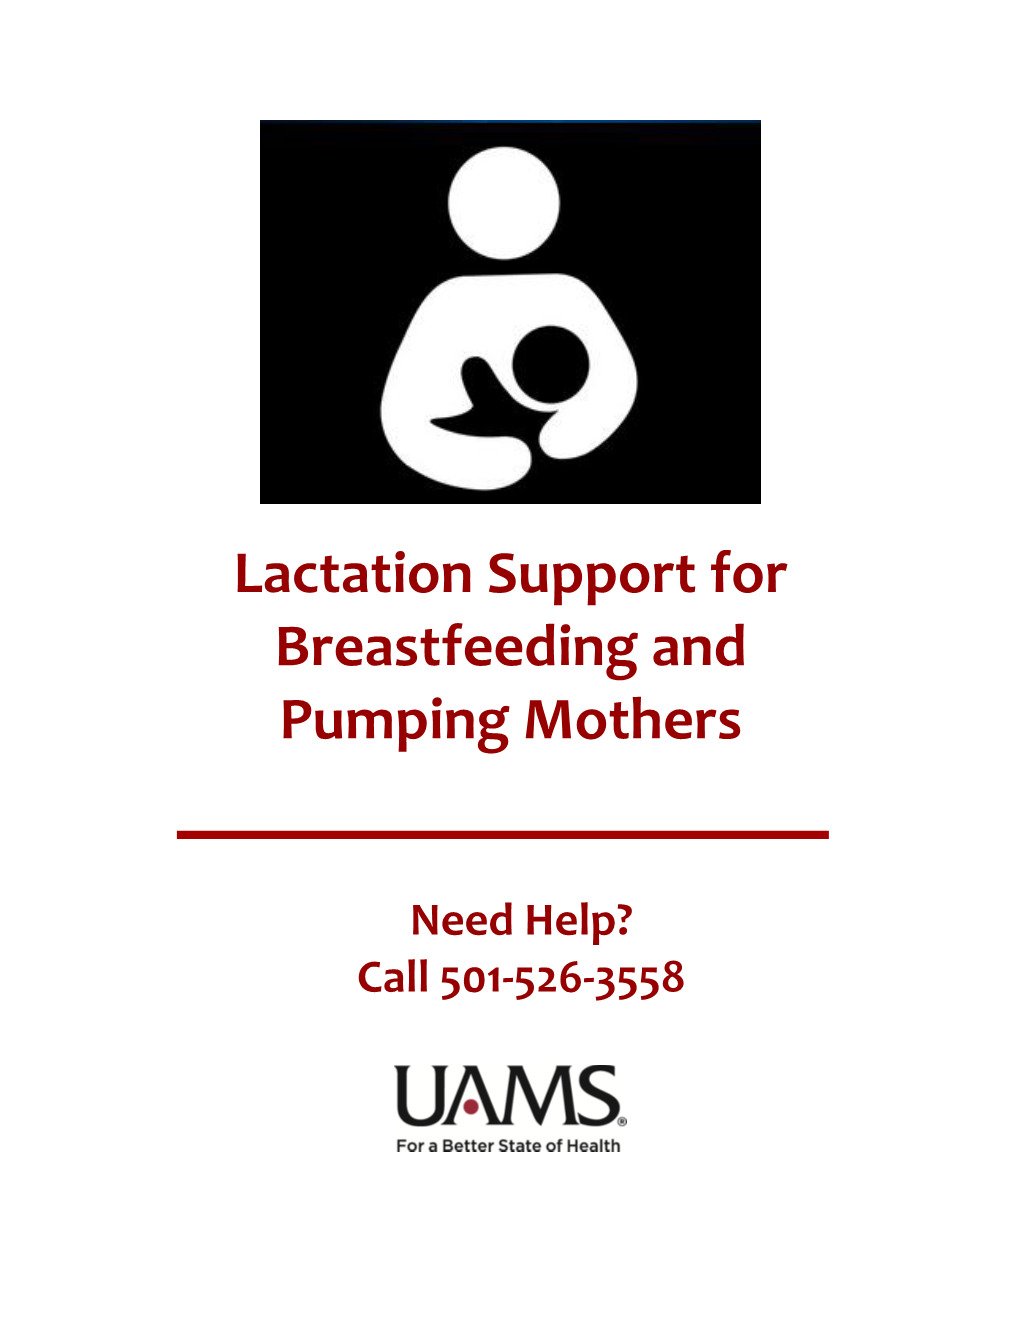 Lactation Support for Breastfeeding and Pumping Mothers